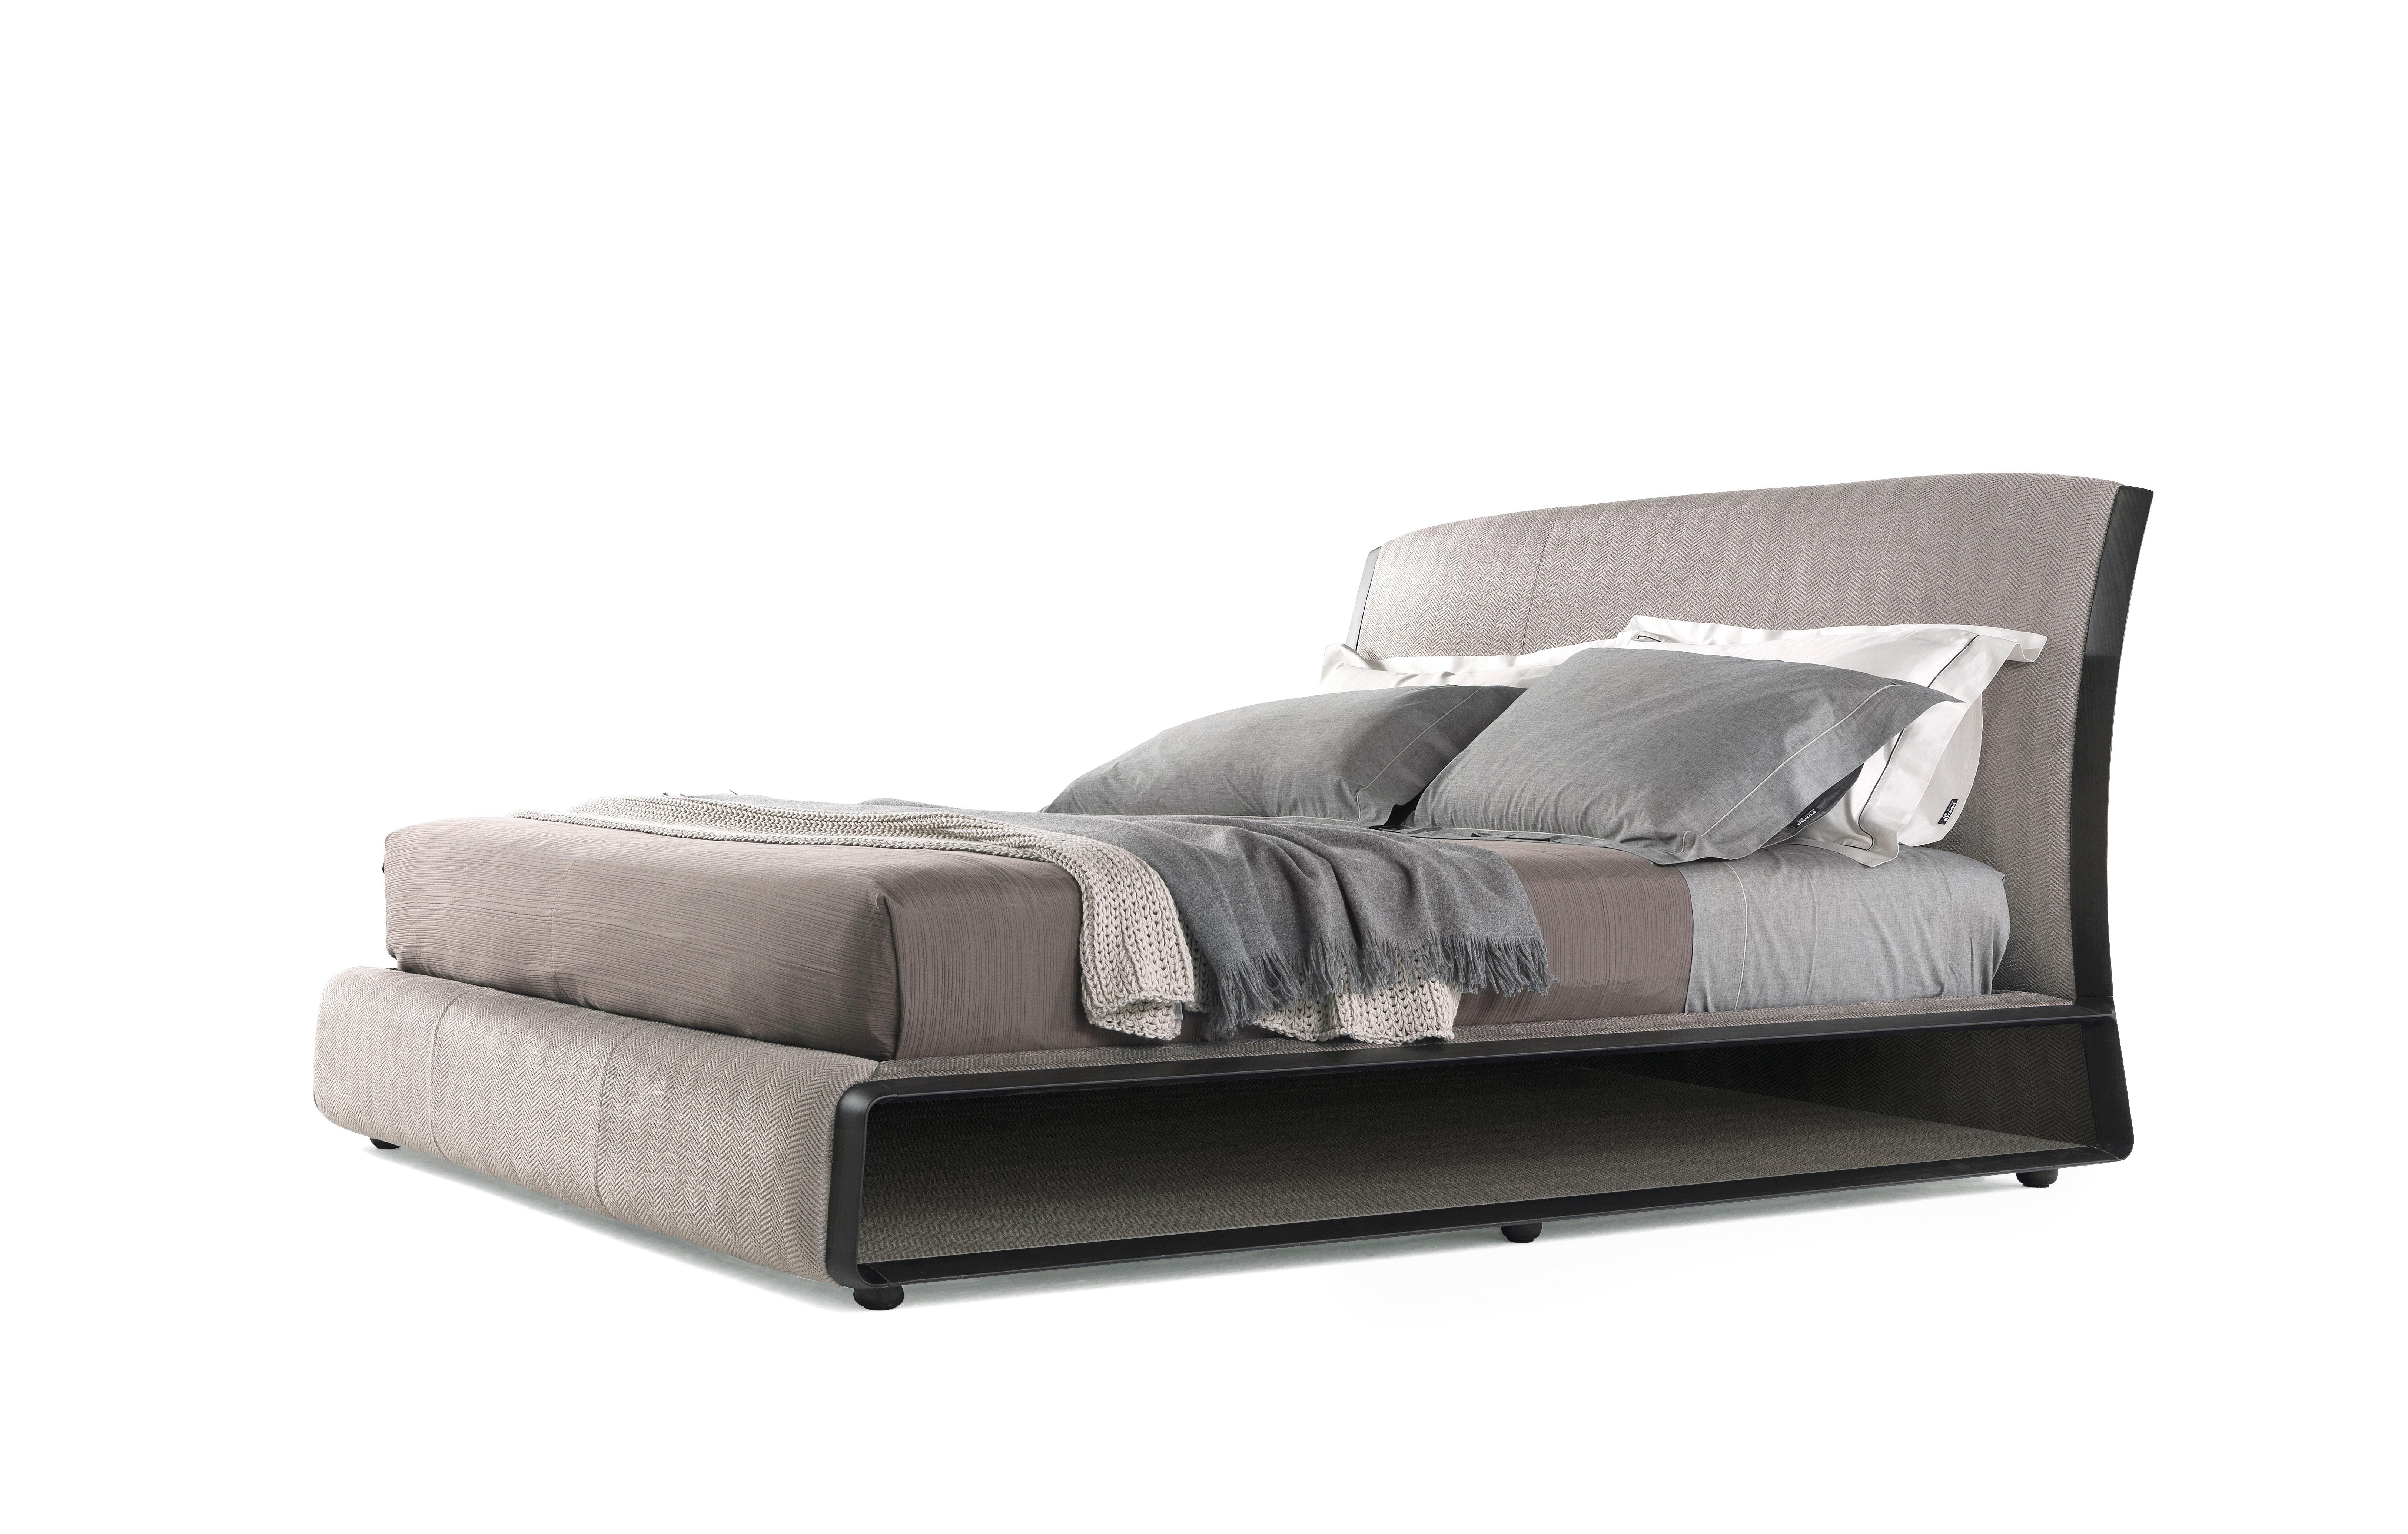 A sinuous yet solid piece of furniture with a compact volume, Wynwood bed combines comfort and aesthetics thanks to its refined and elaborate design. With a headboard upholstered in grey herringbone fabric, referring to the world of men's tailoring,